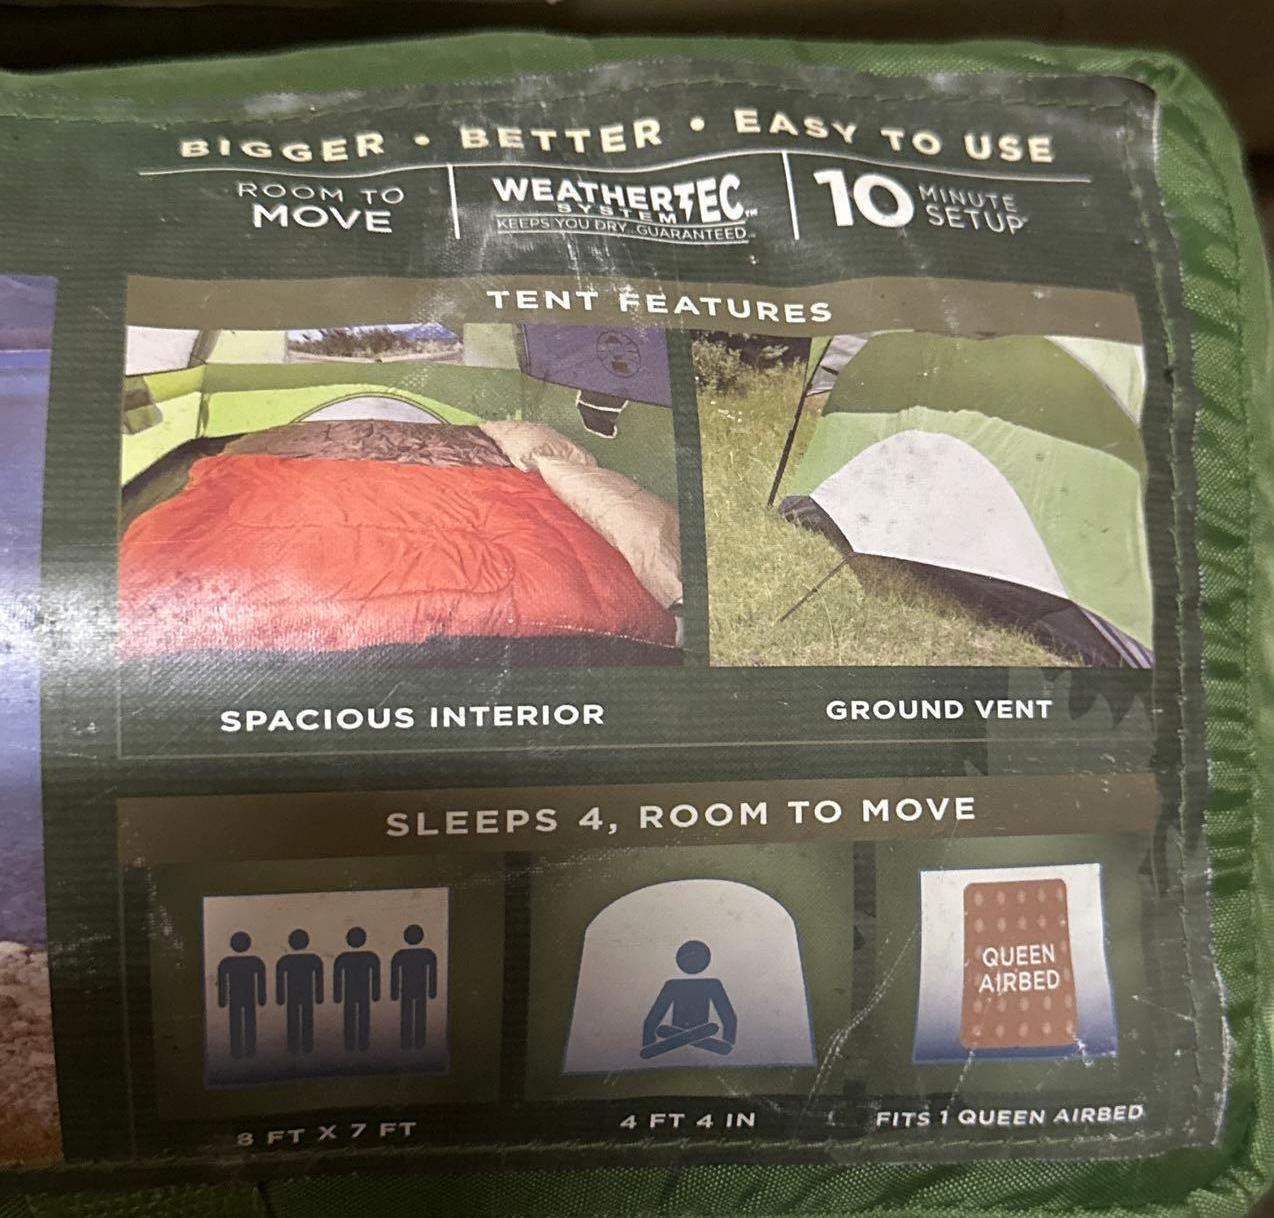 Coleman 4 Man Tent and Bestway Air Mattress with built in pump